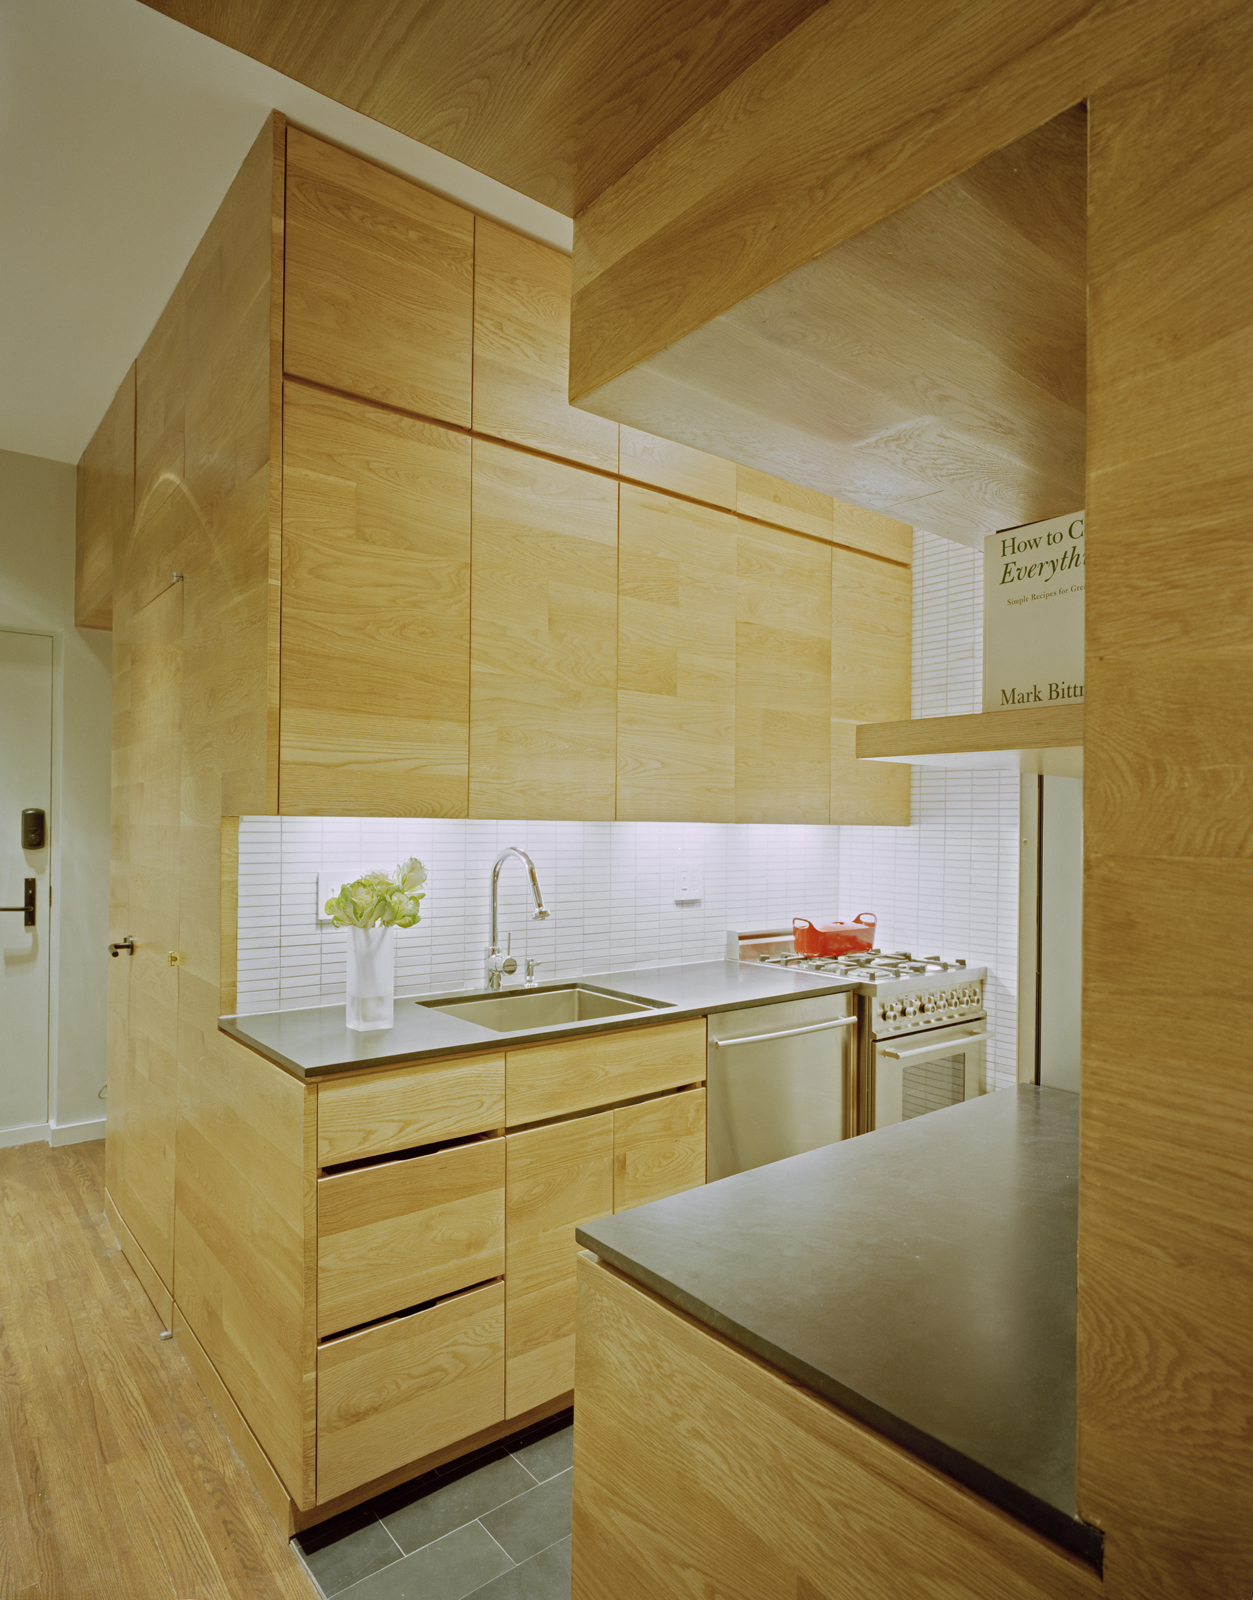 Continuous finishes hint at the tight integration of the kitchen appliances and 